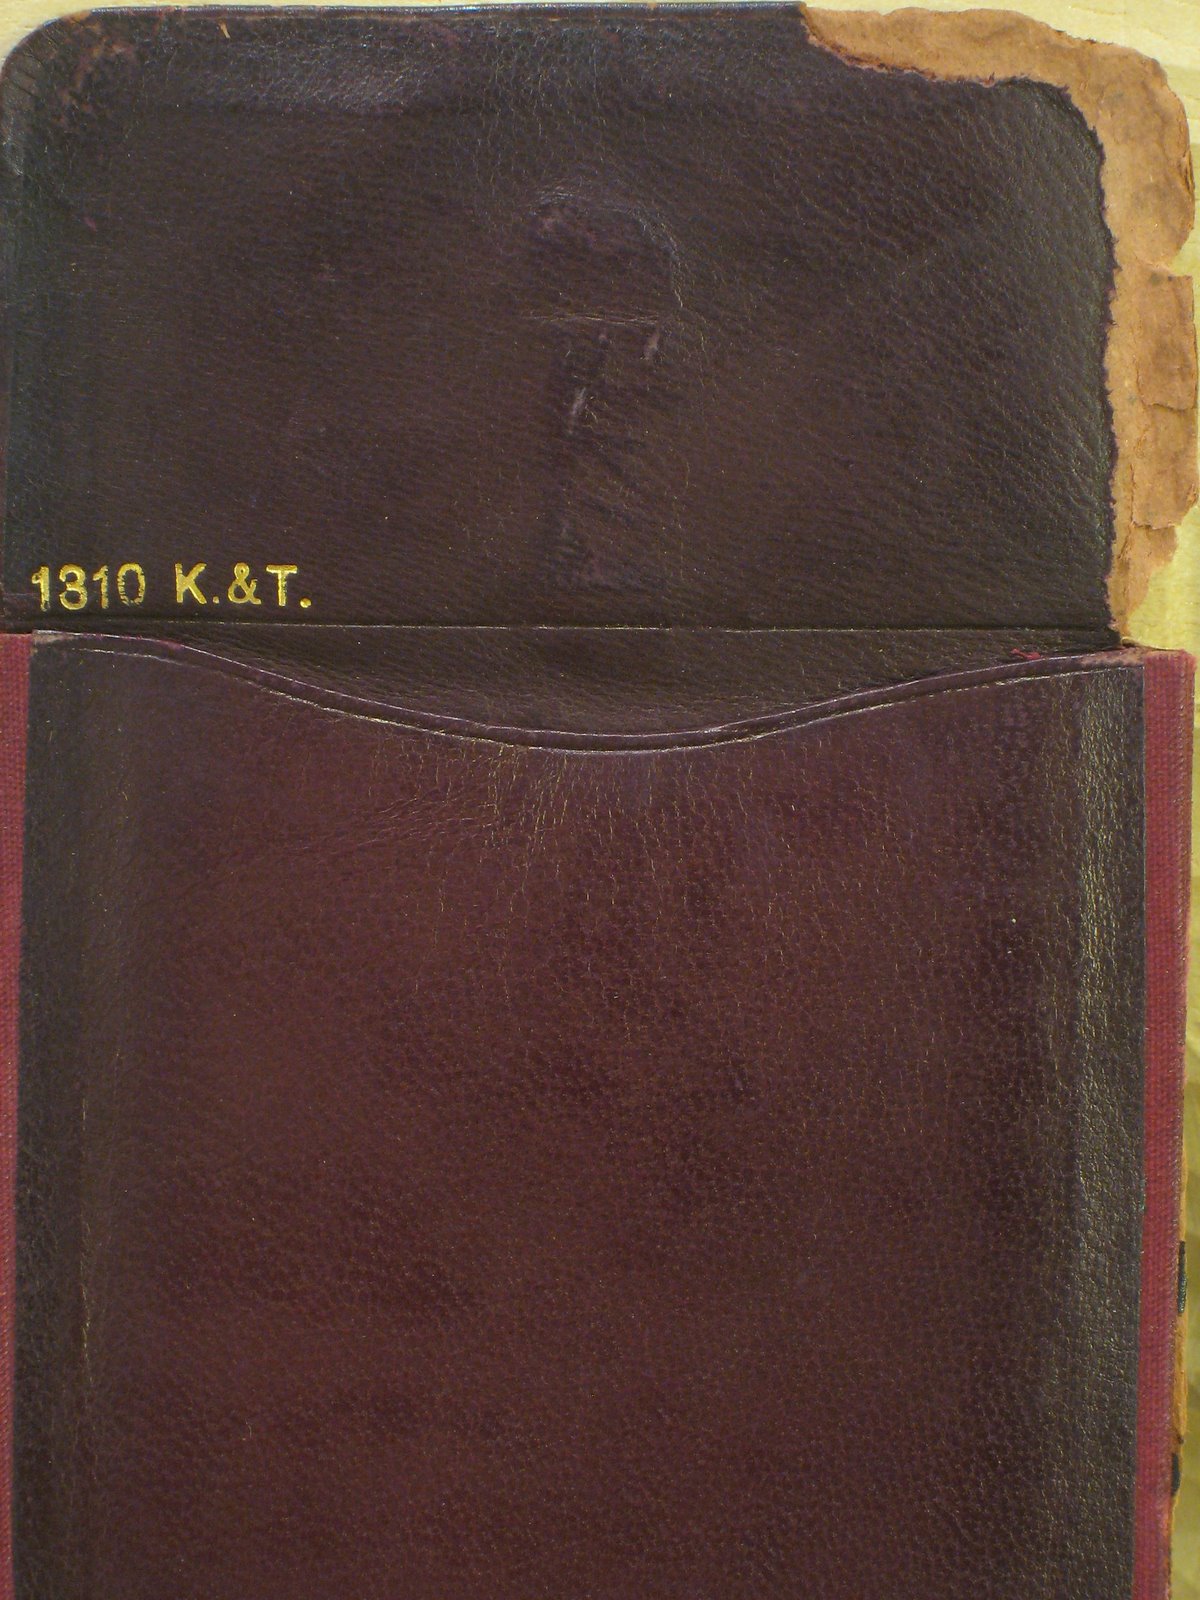 The Engineer's Note Book